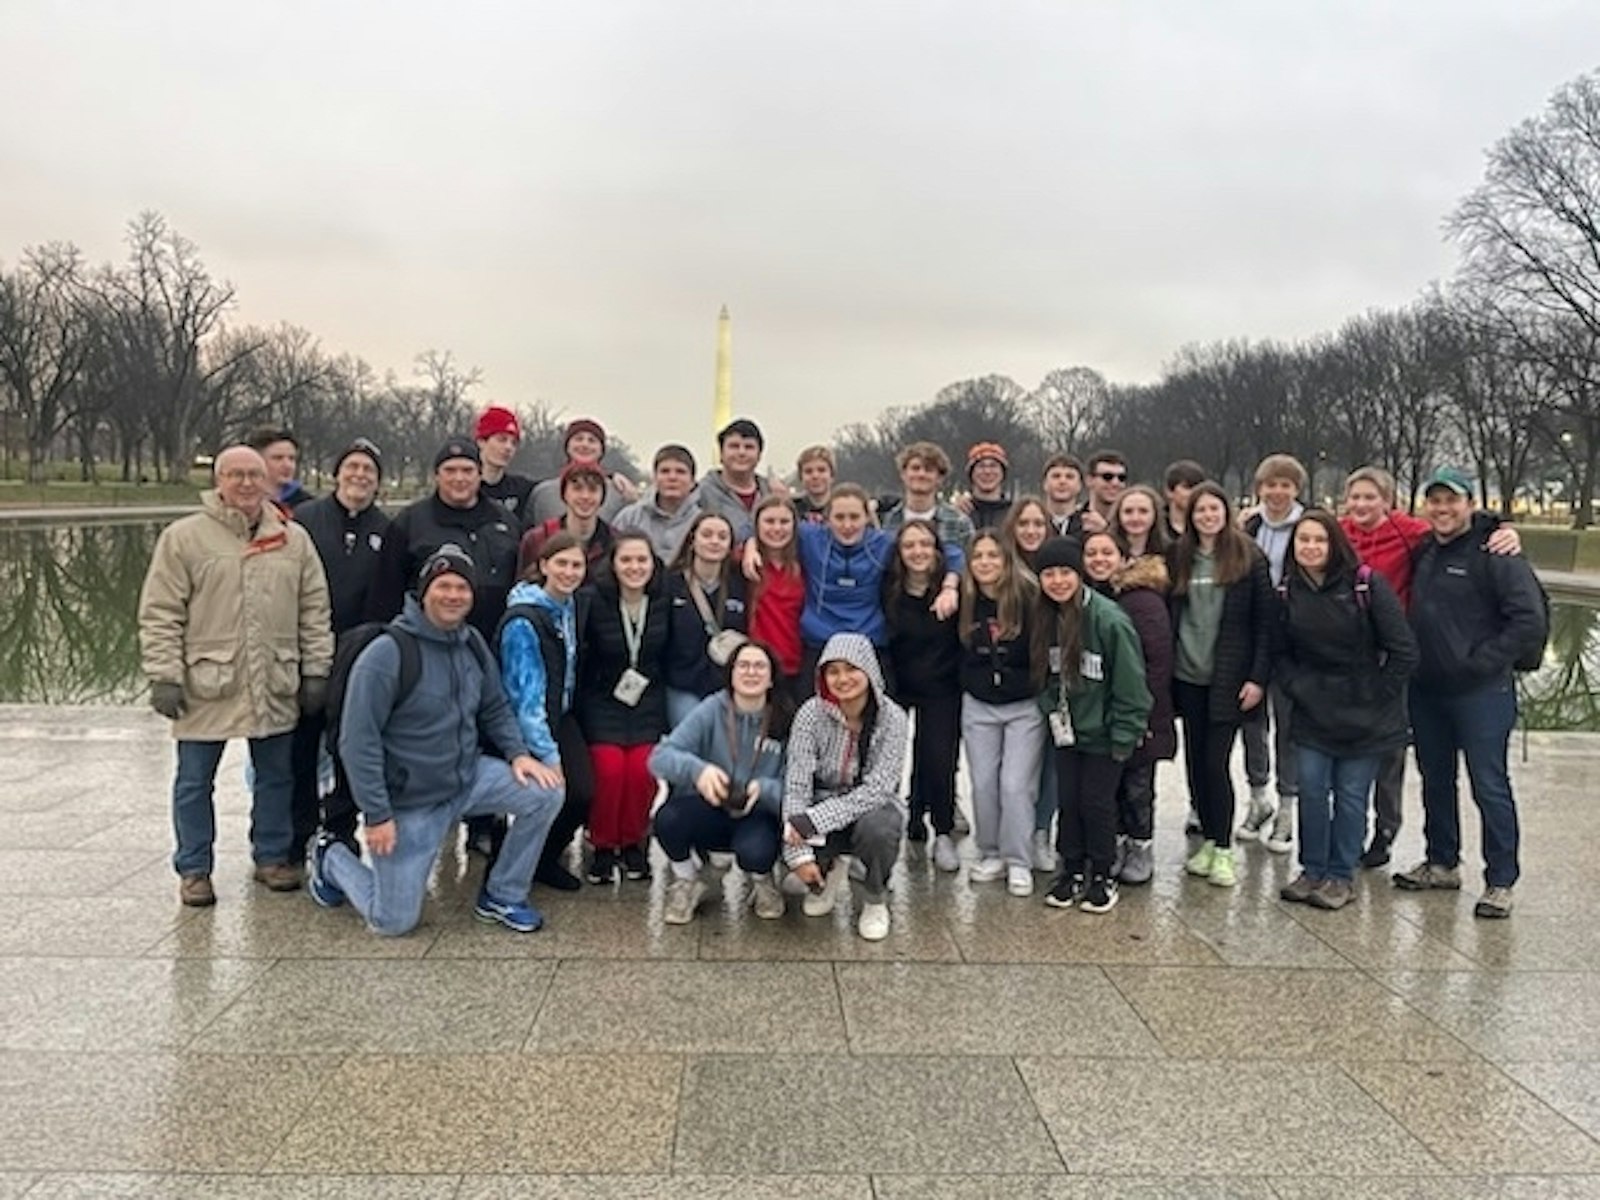 Approximately 30 students, staff and volunteers from Divine Child High School in Dearborn woke up early Thursday to board a bus headed for Washington, D.C., for the annual March for Life. The trip also included visits to the National Holocaust Museum and Arlington National Cemetery in order to give the pilgrims perspective on what means to truly value life from conception until natural death. (Courtesy of Divine Child High School)